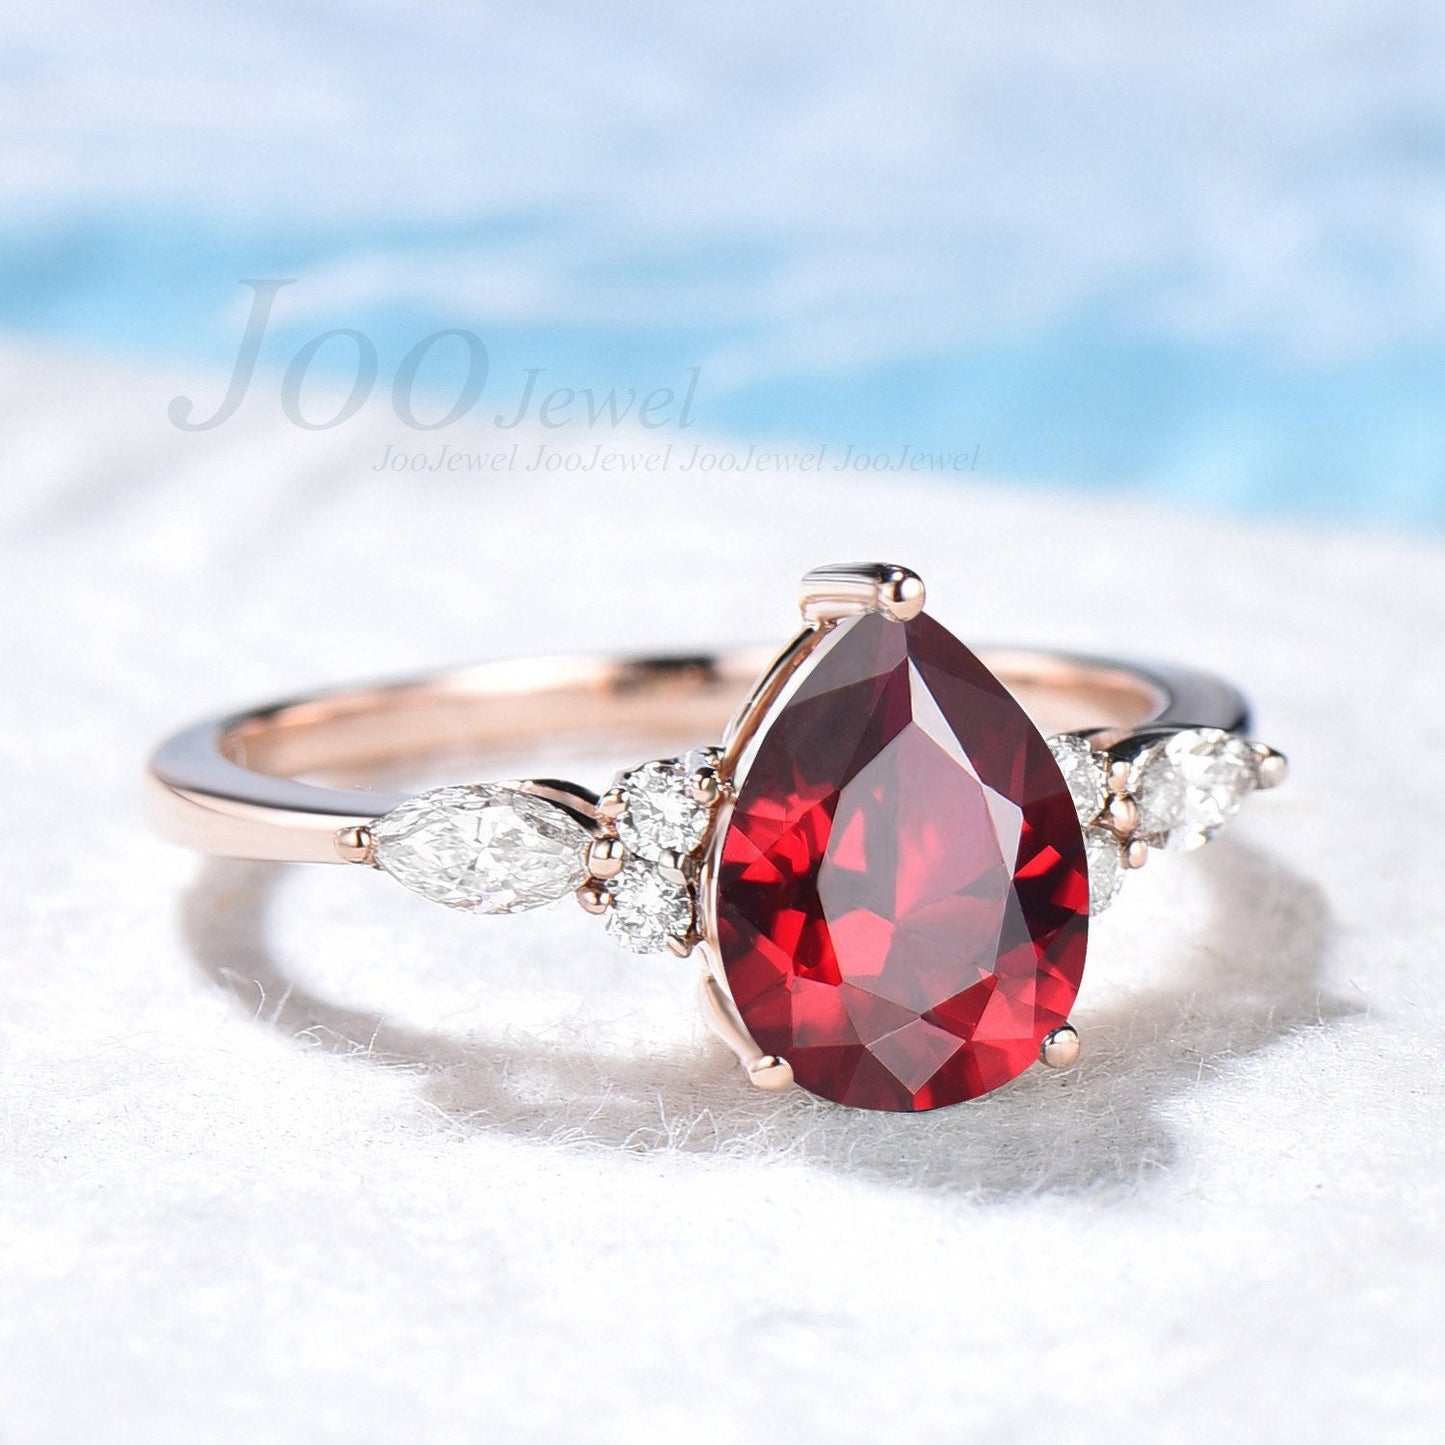 Vintage Pear Shaped Ruby Engagement Ring Sterling Silver 1.25ct Ruby Bridal Wedding ring Anniversary Gift For Her July Birthstone Jewelry